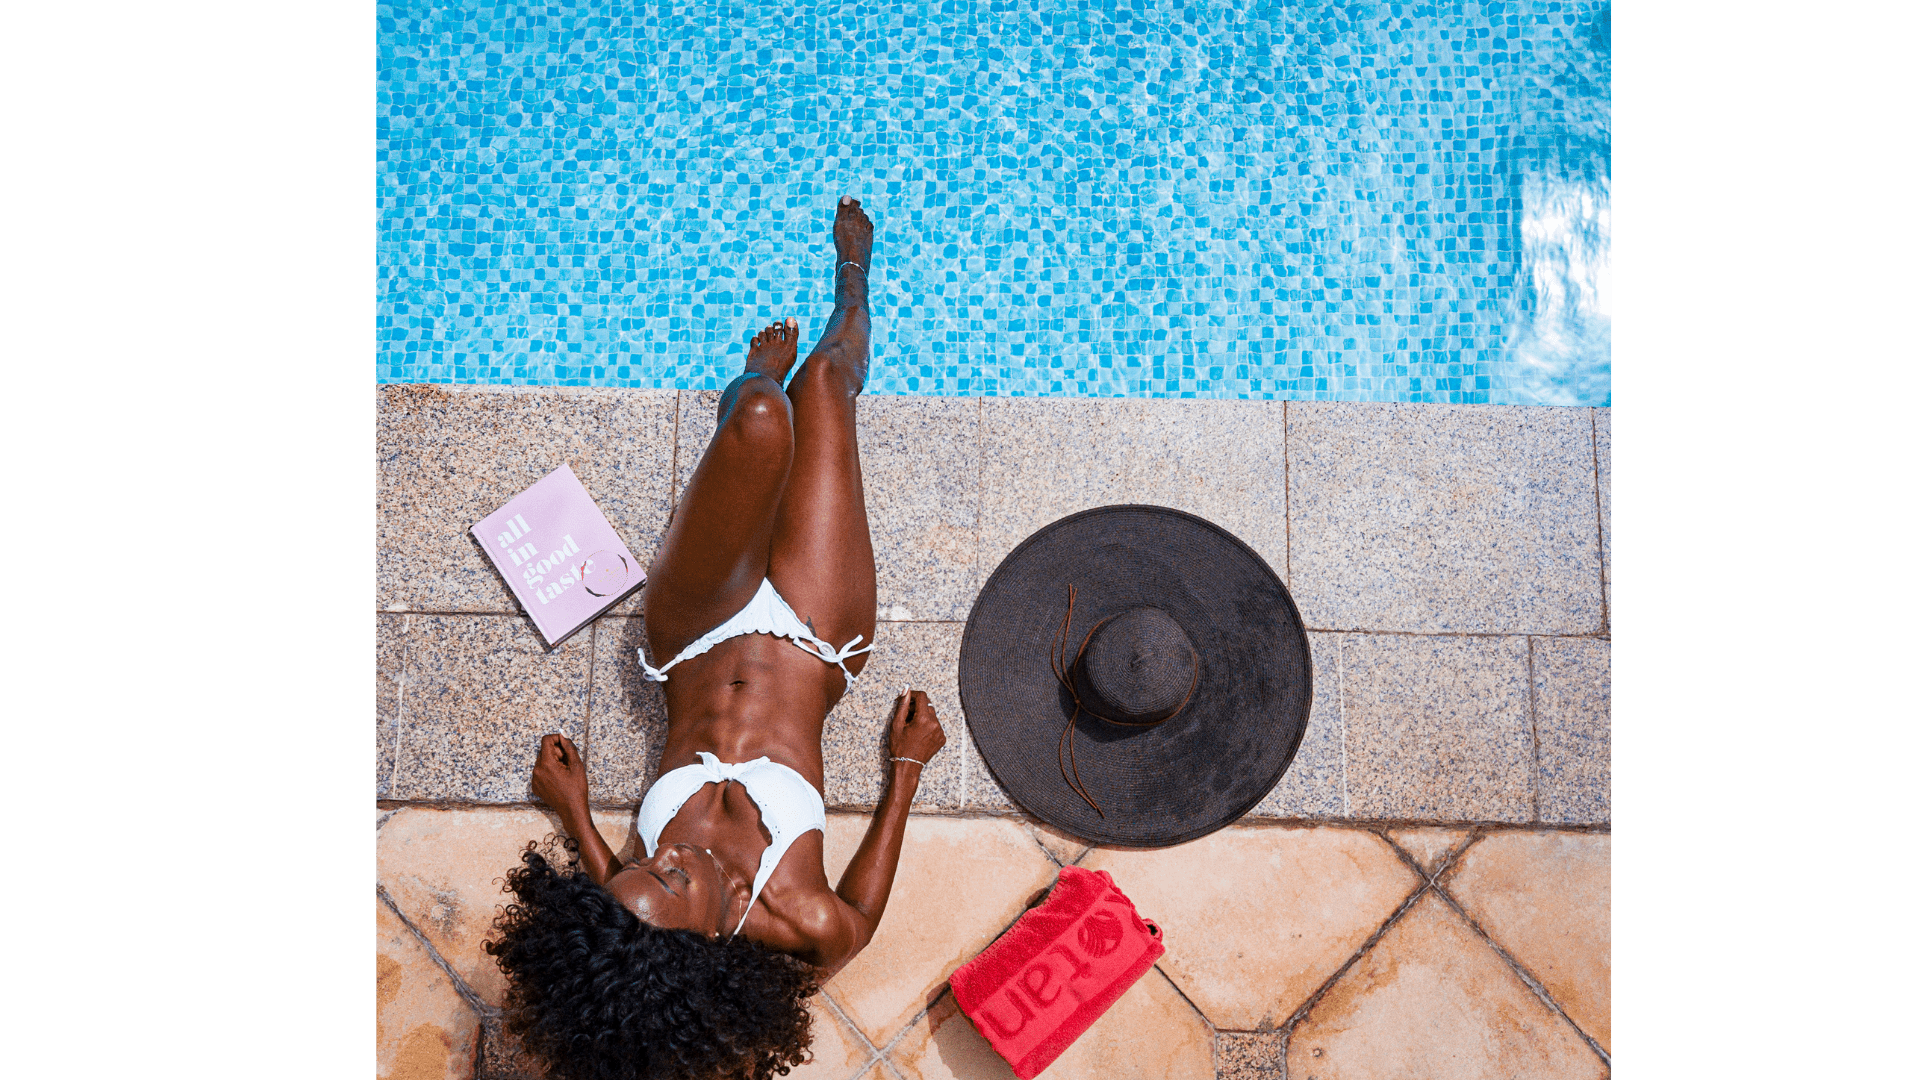 A woman sitting poolside with her feet dipped in the water with a book, hat and towel next to her